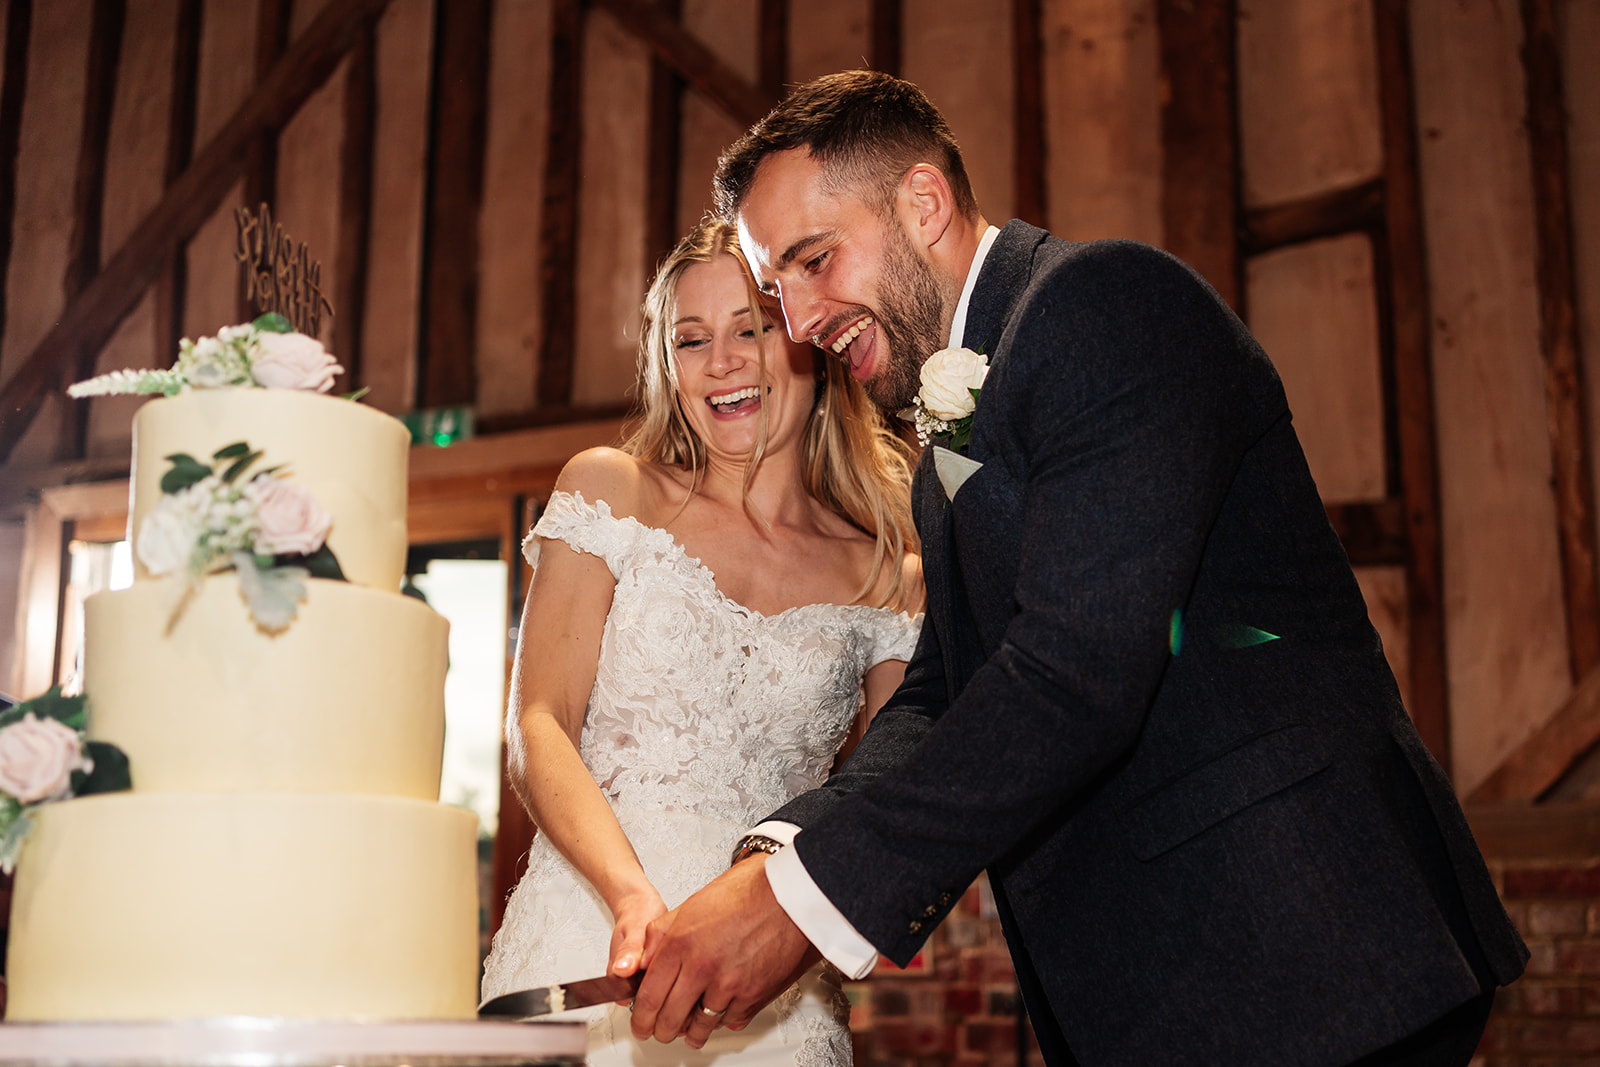 Bride and groom cutting the wedding cake at Lilllibrooke Manor